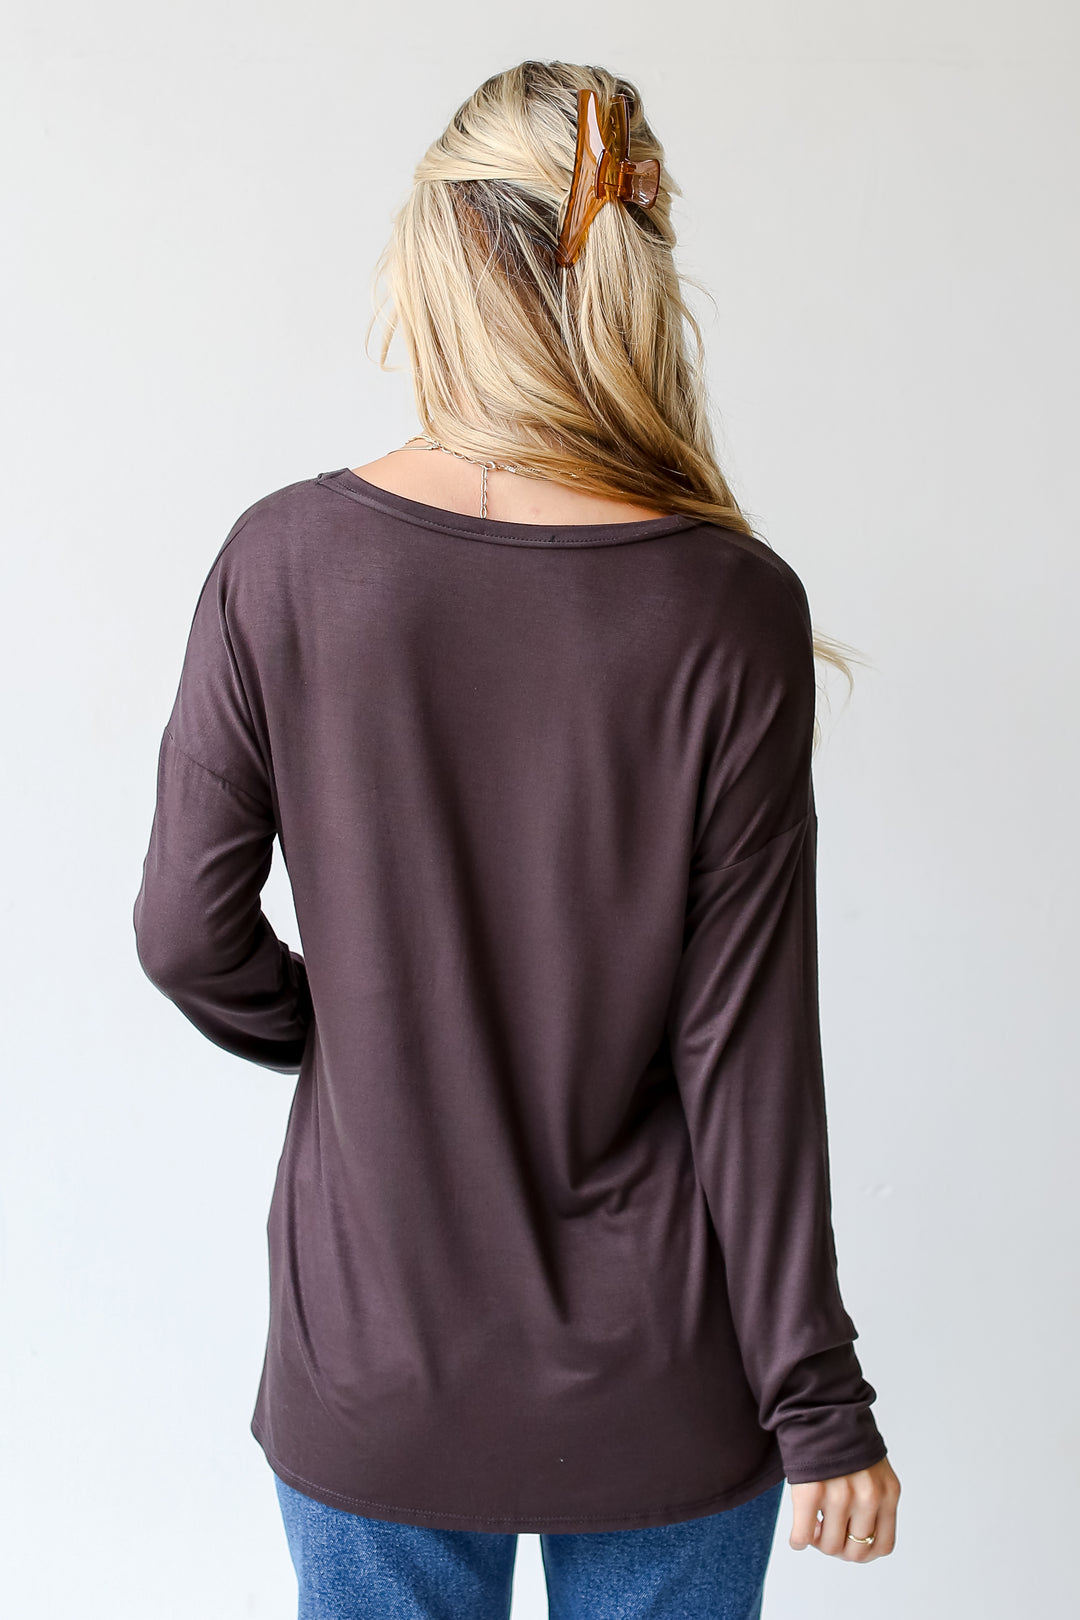 charcoal Pocket Tee back view